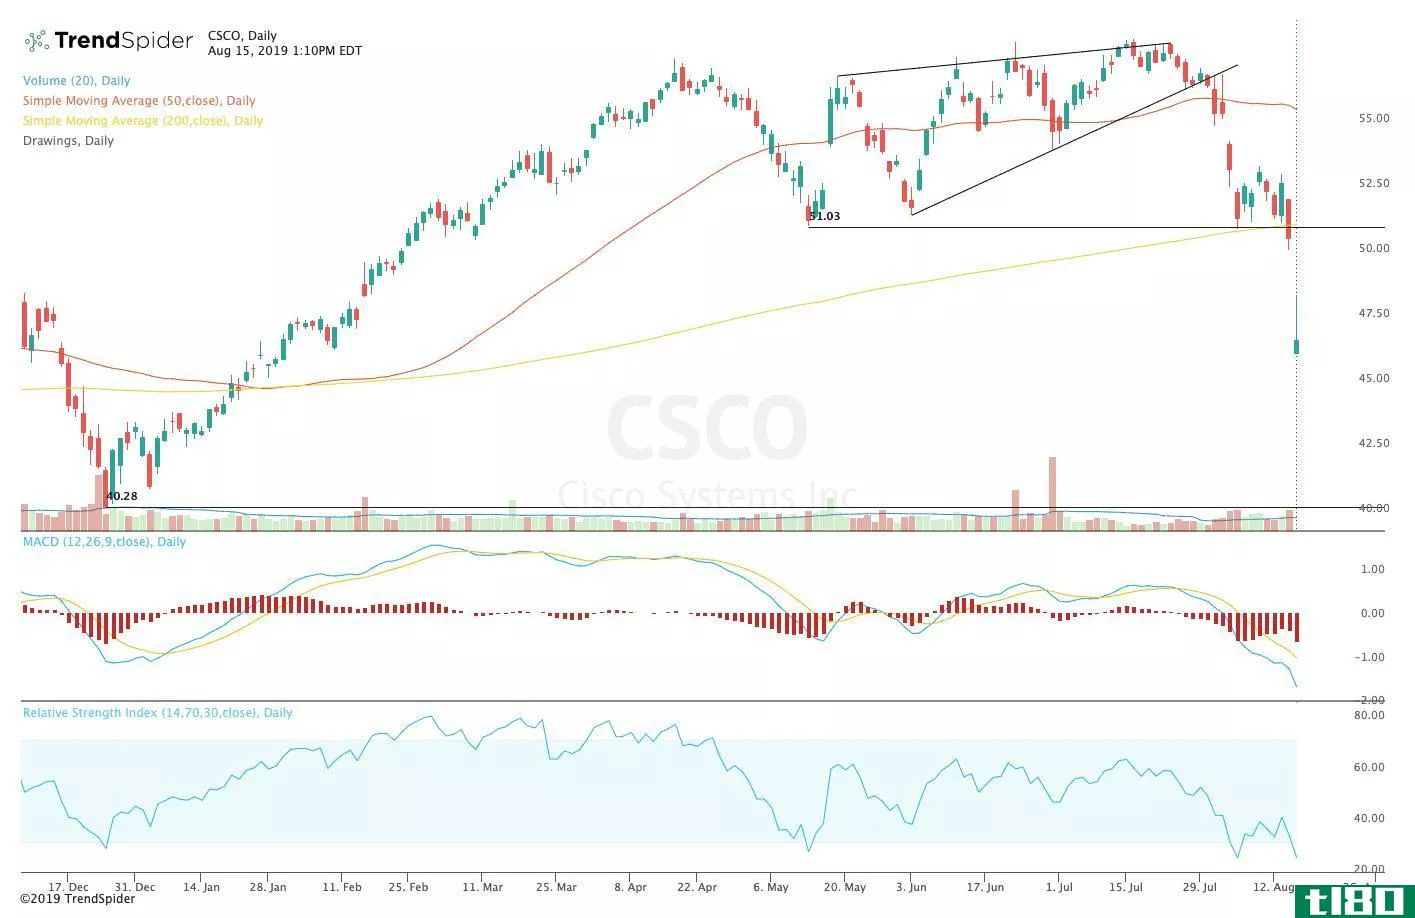 Chart showing the share price performance of Cisco Systems, Inc. (CSCO)